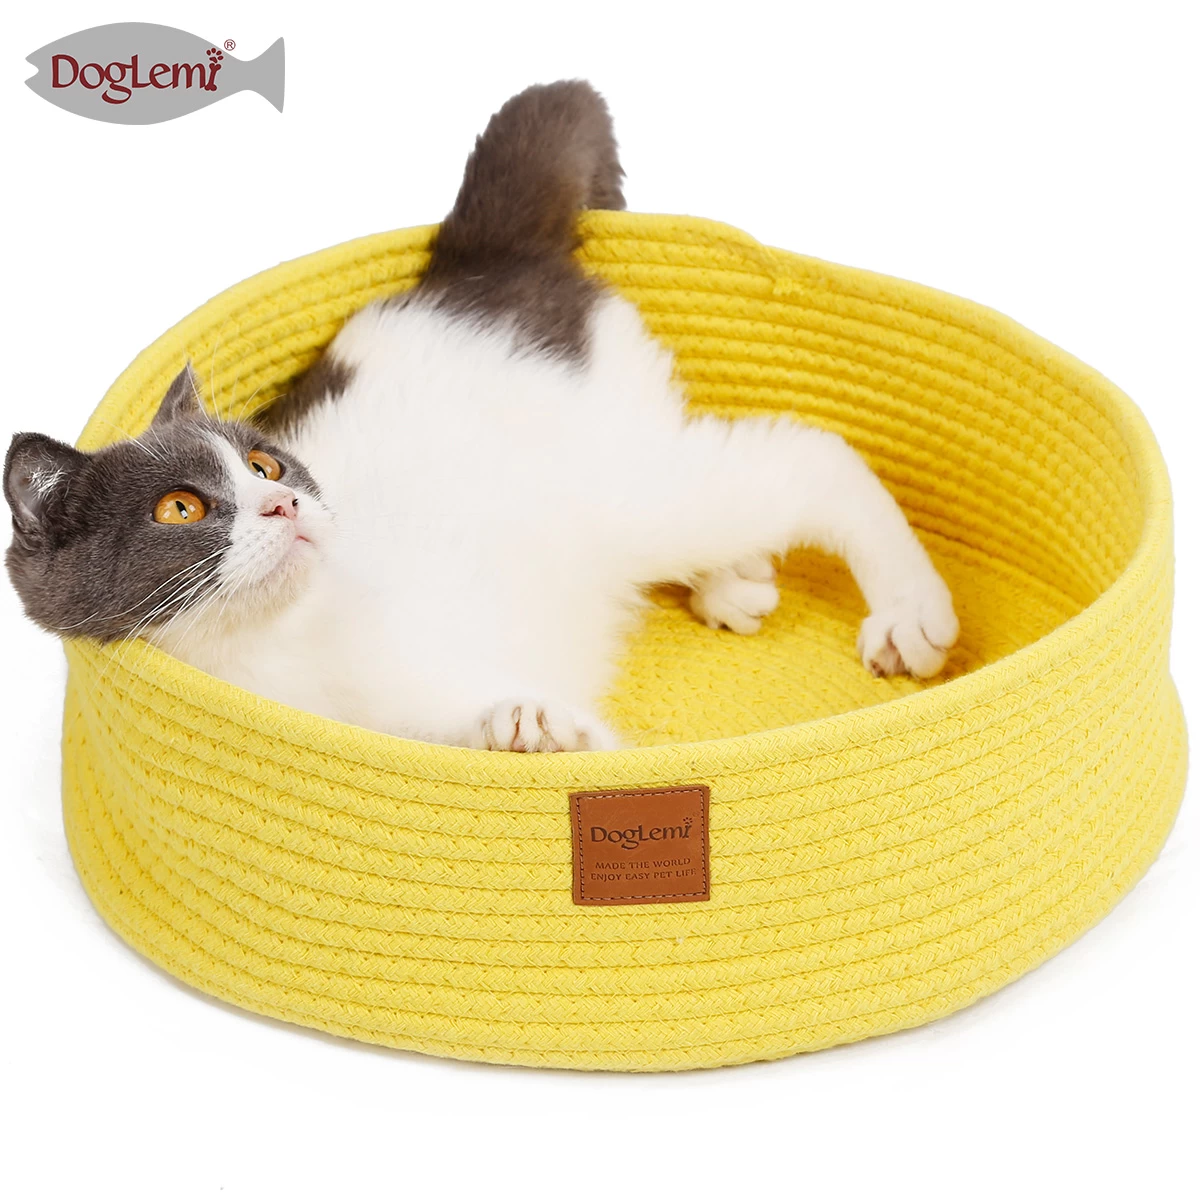 Cotton Braided Cat Bed